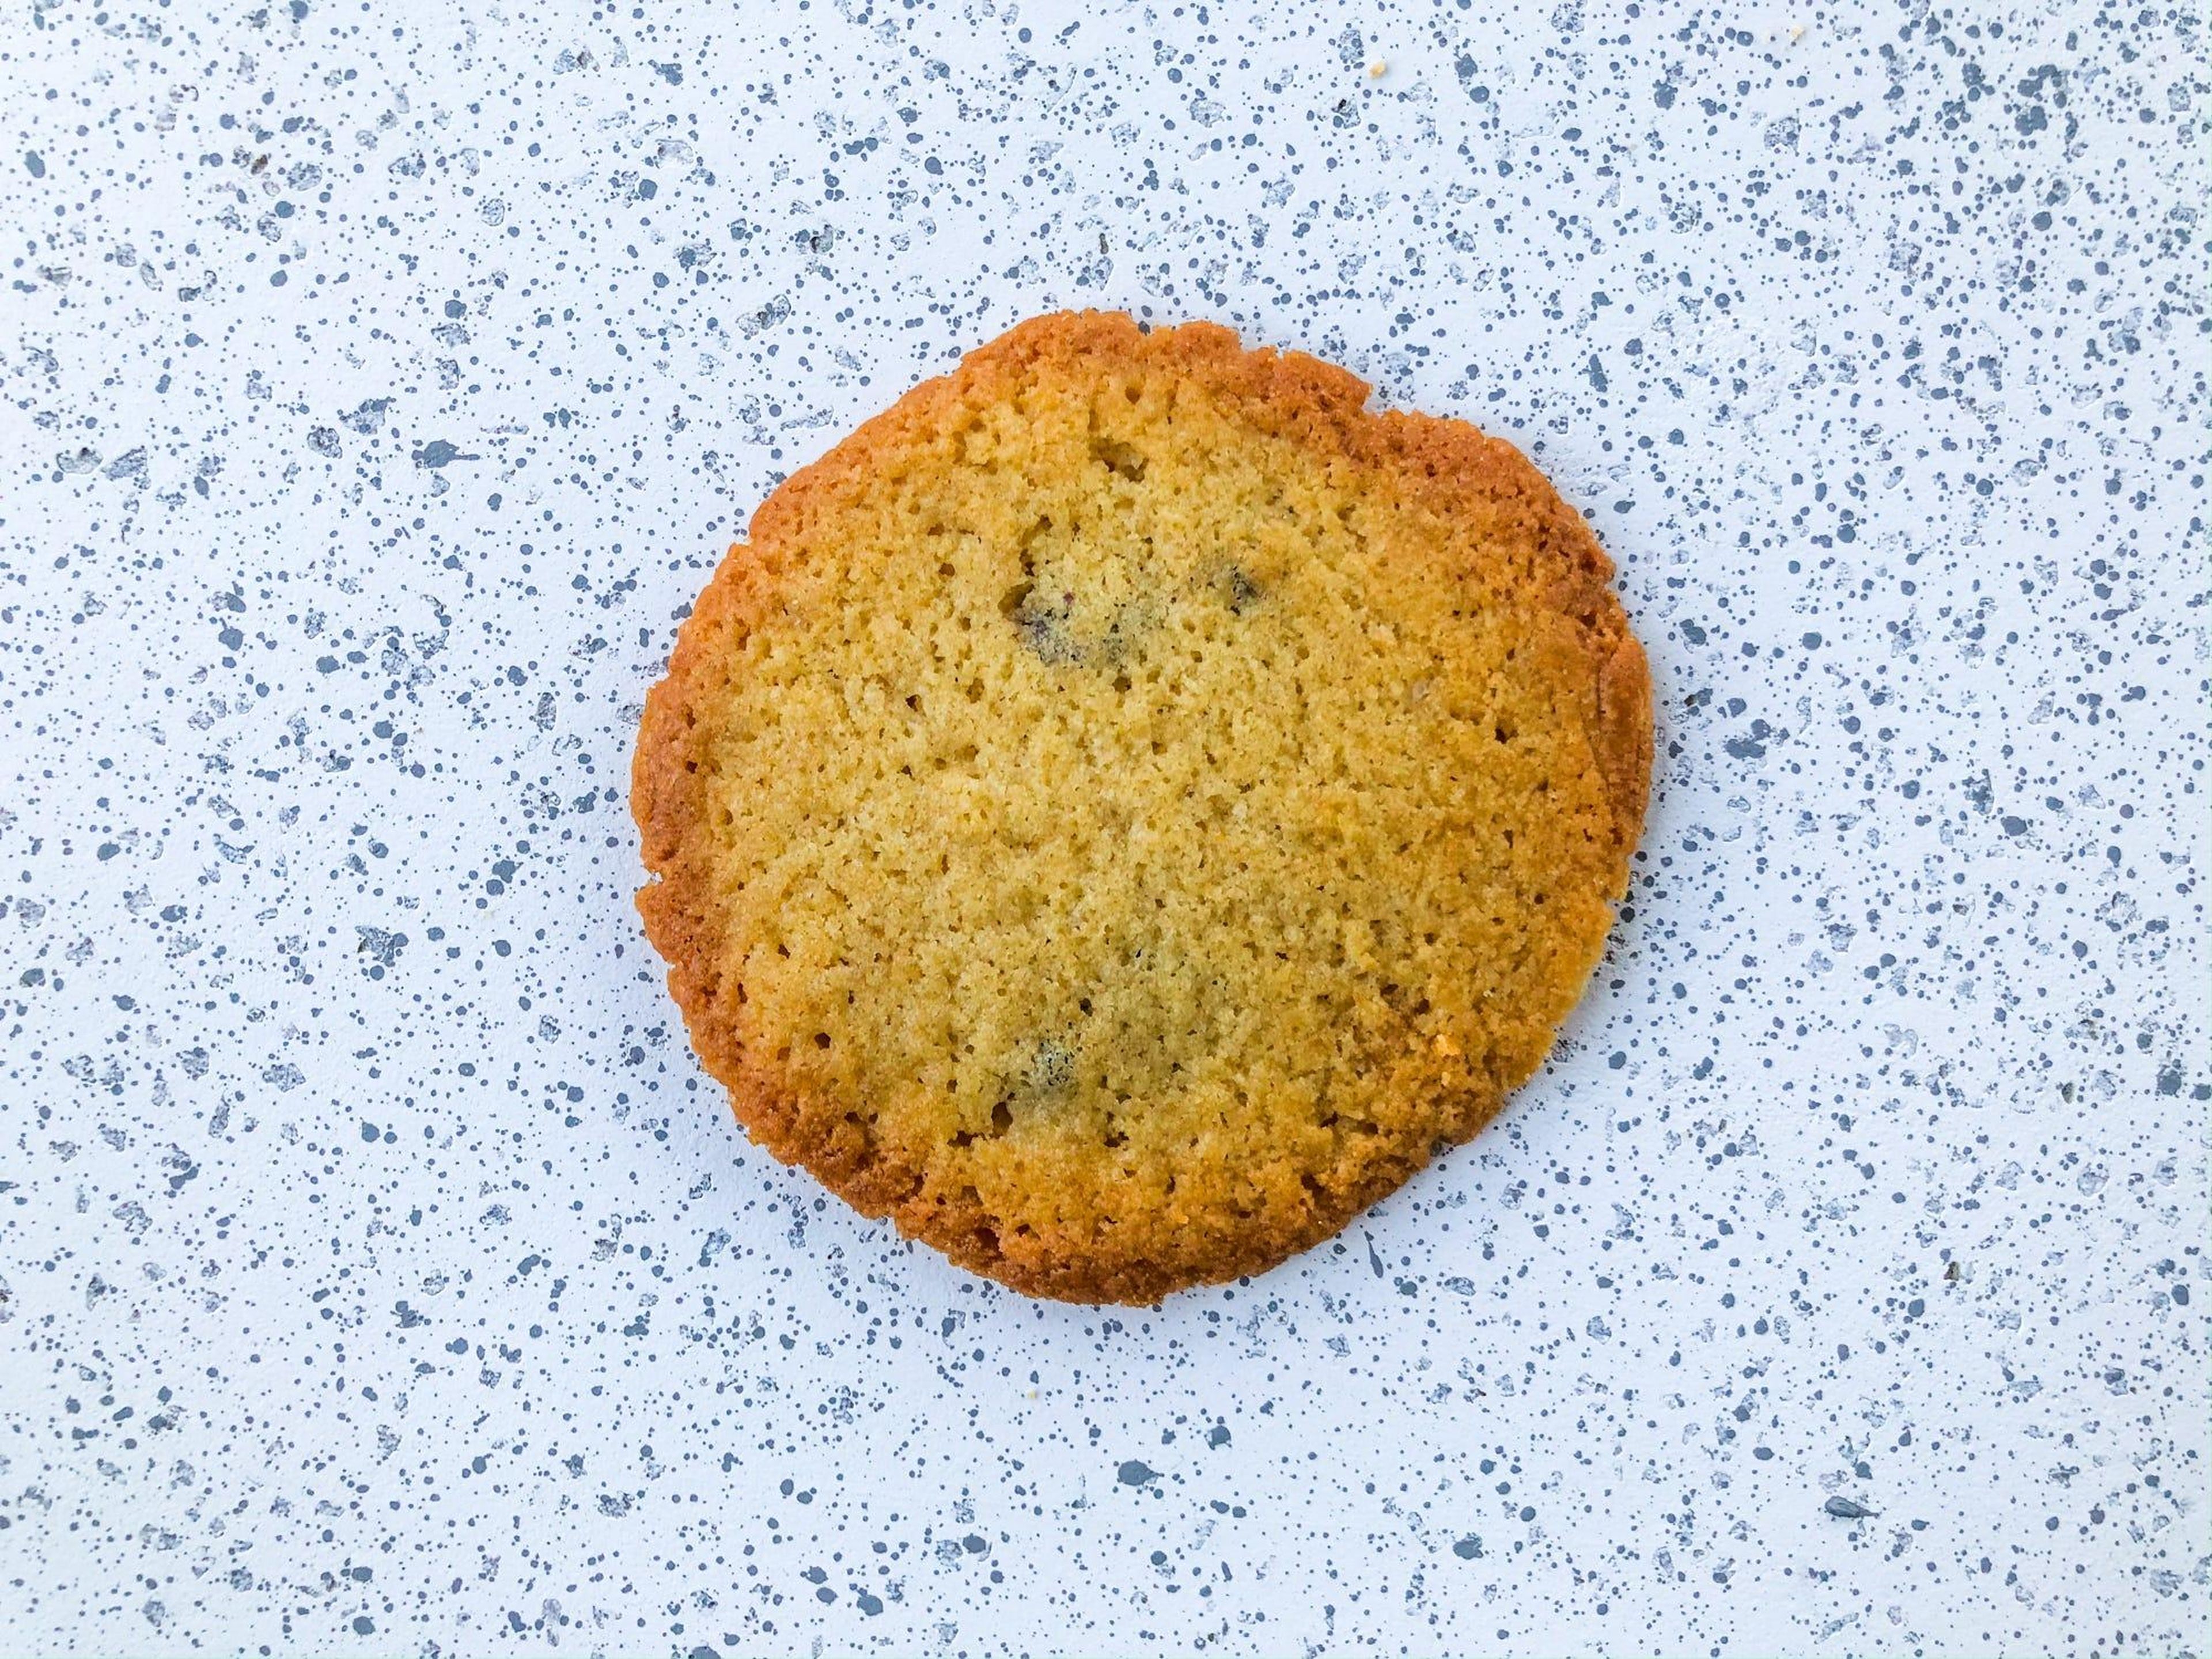 A cookie with too much butter.